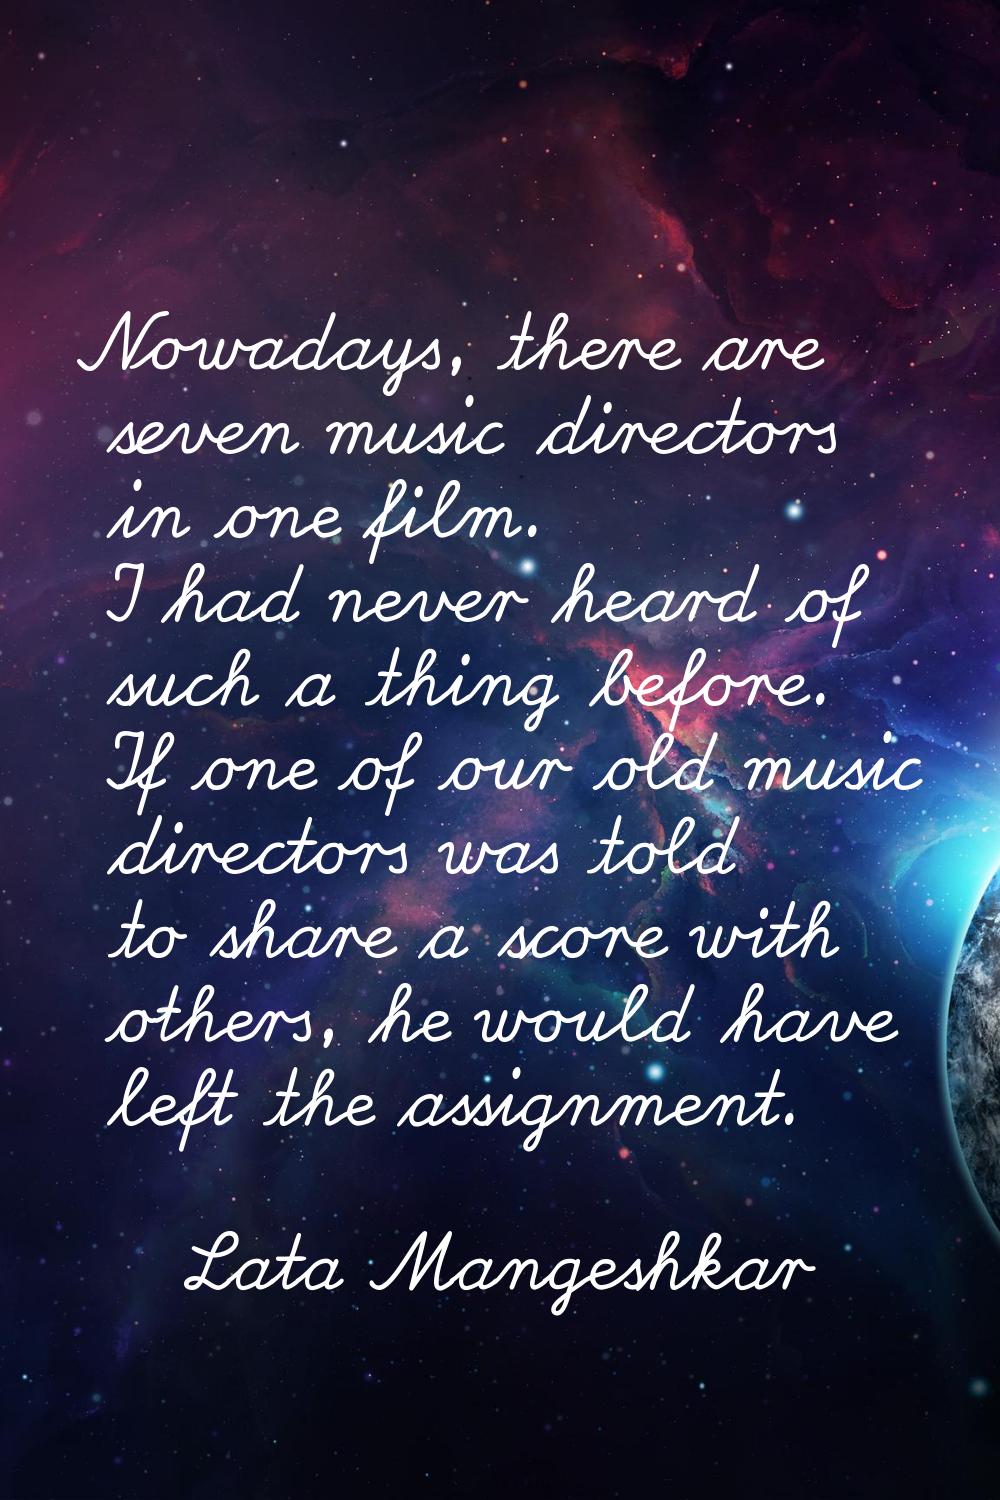 Nowadays, there are seven music directors in one film. I had never heard of such a thing before. If